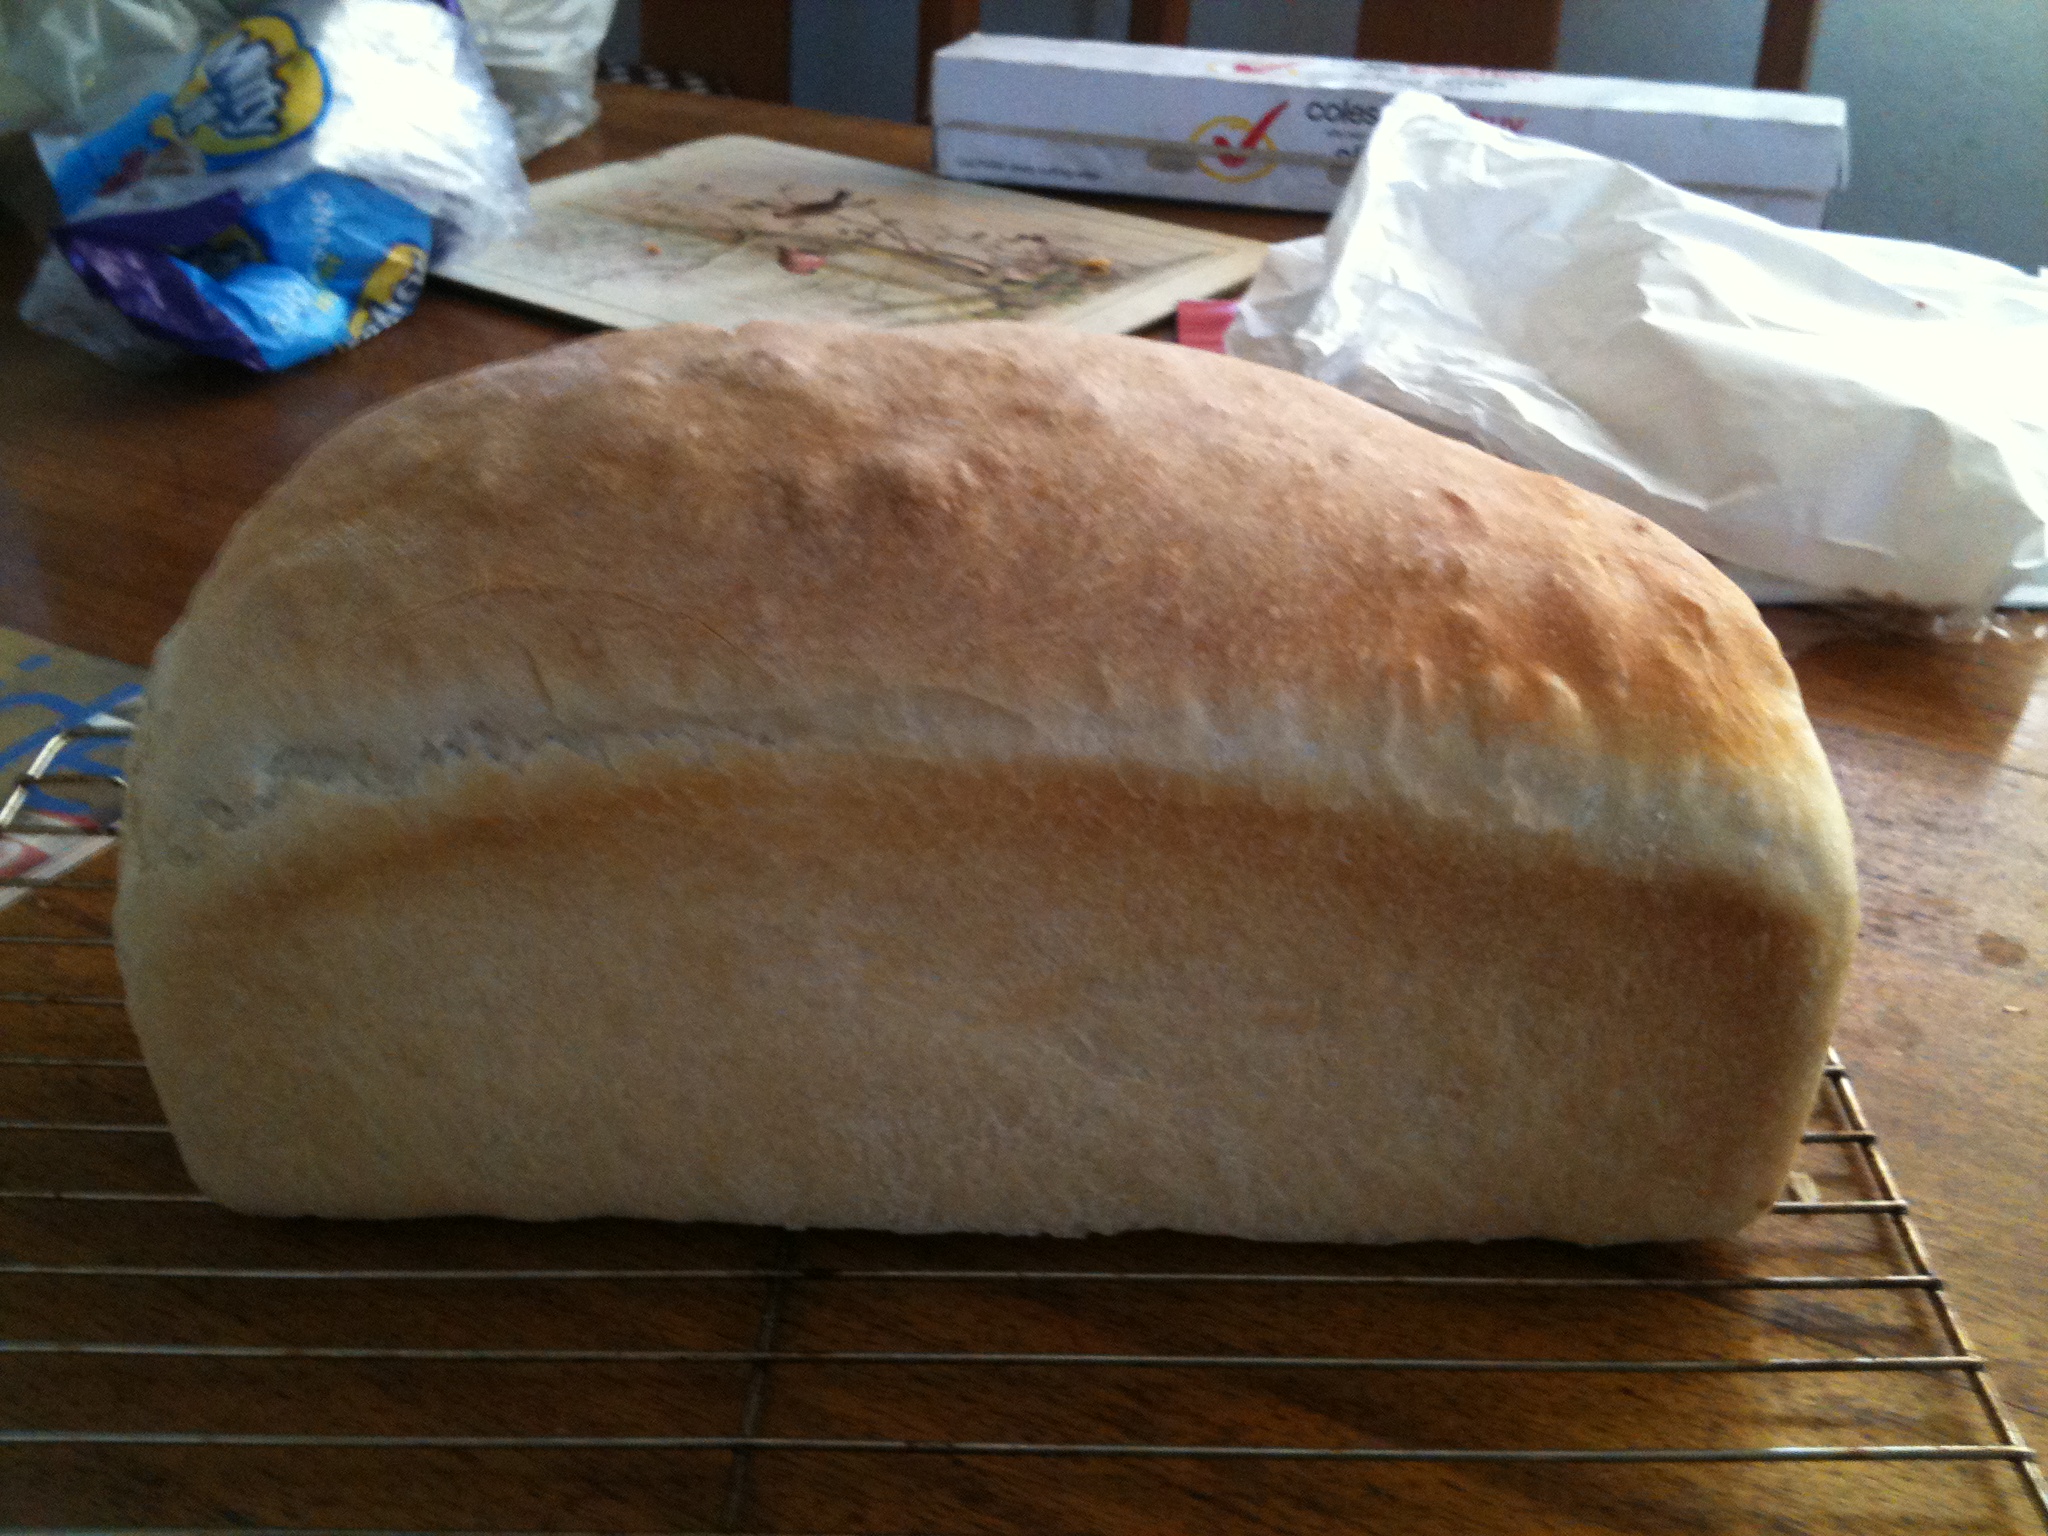 Click image for larger version  Name:	bread.jpg Views:	2 Size:	1.12 MB ID:	286094